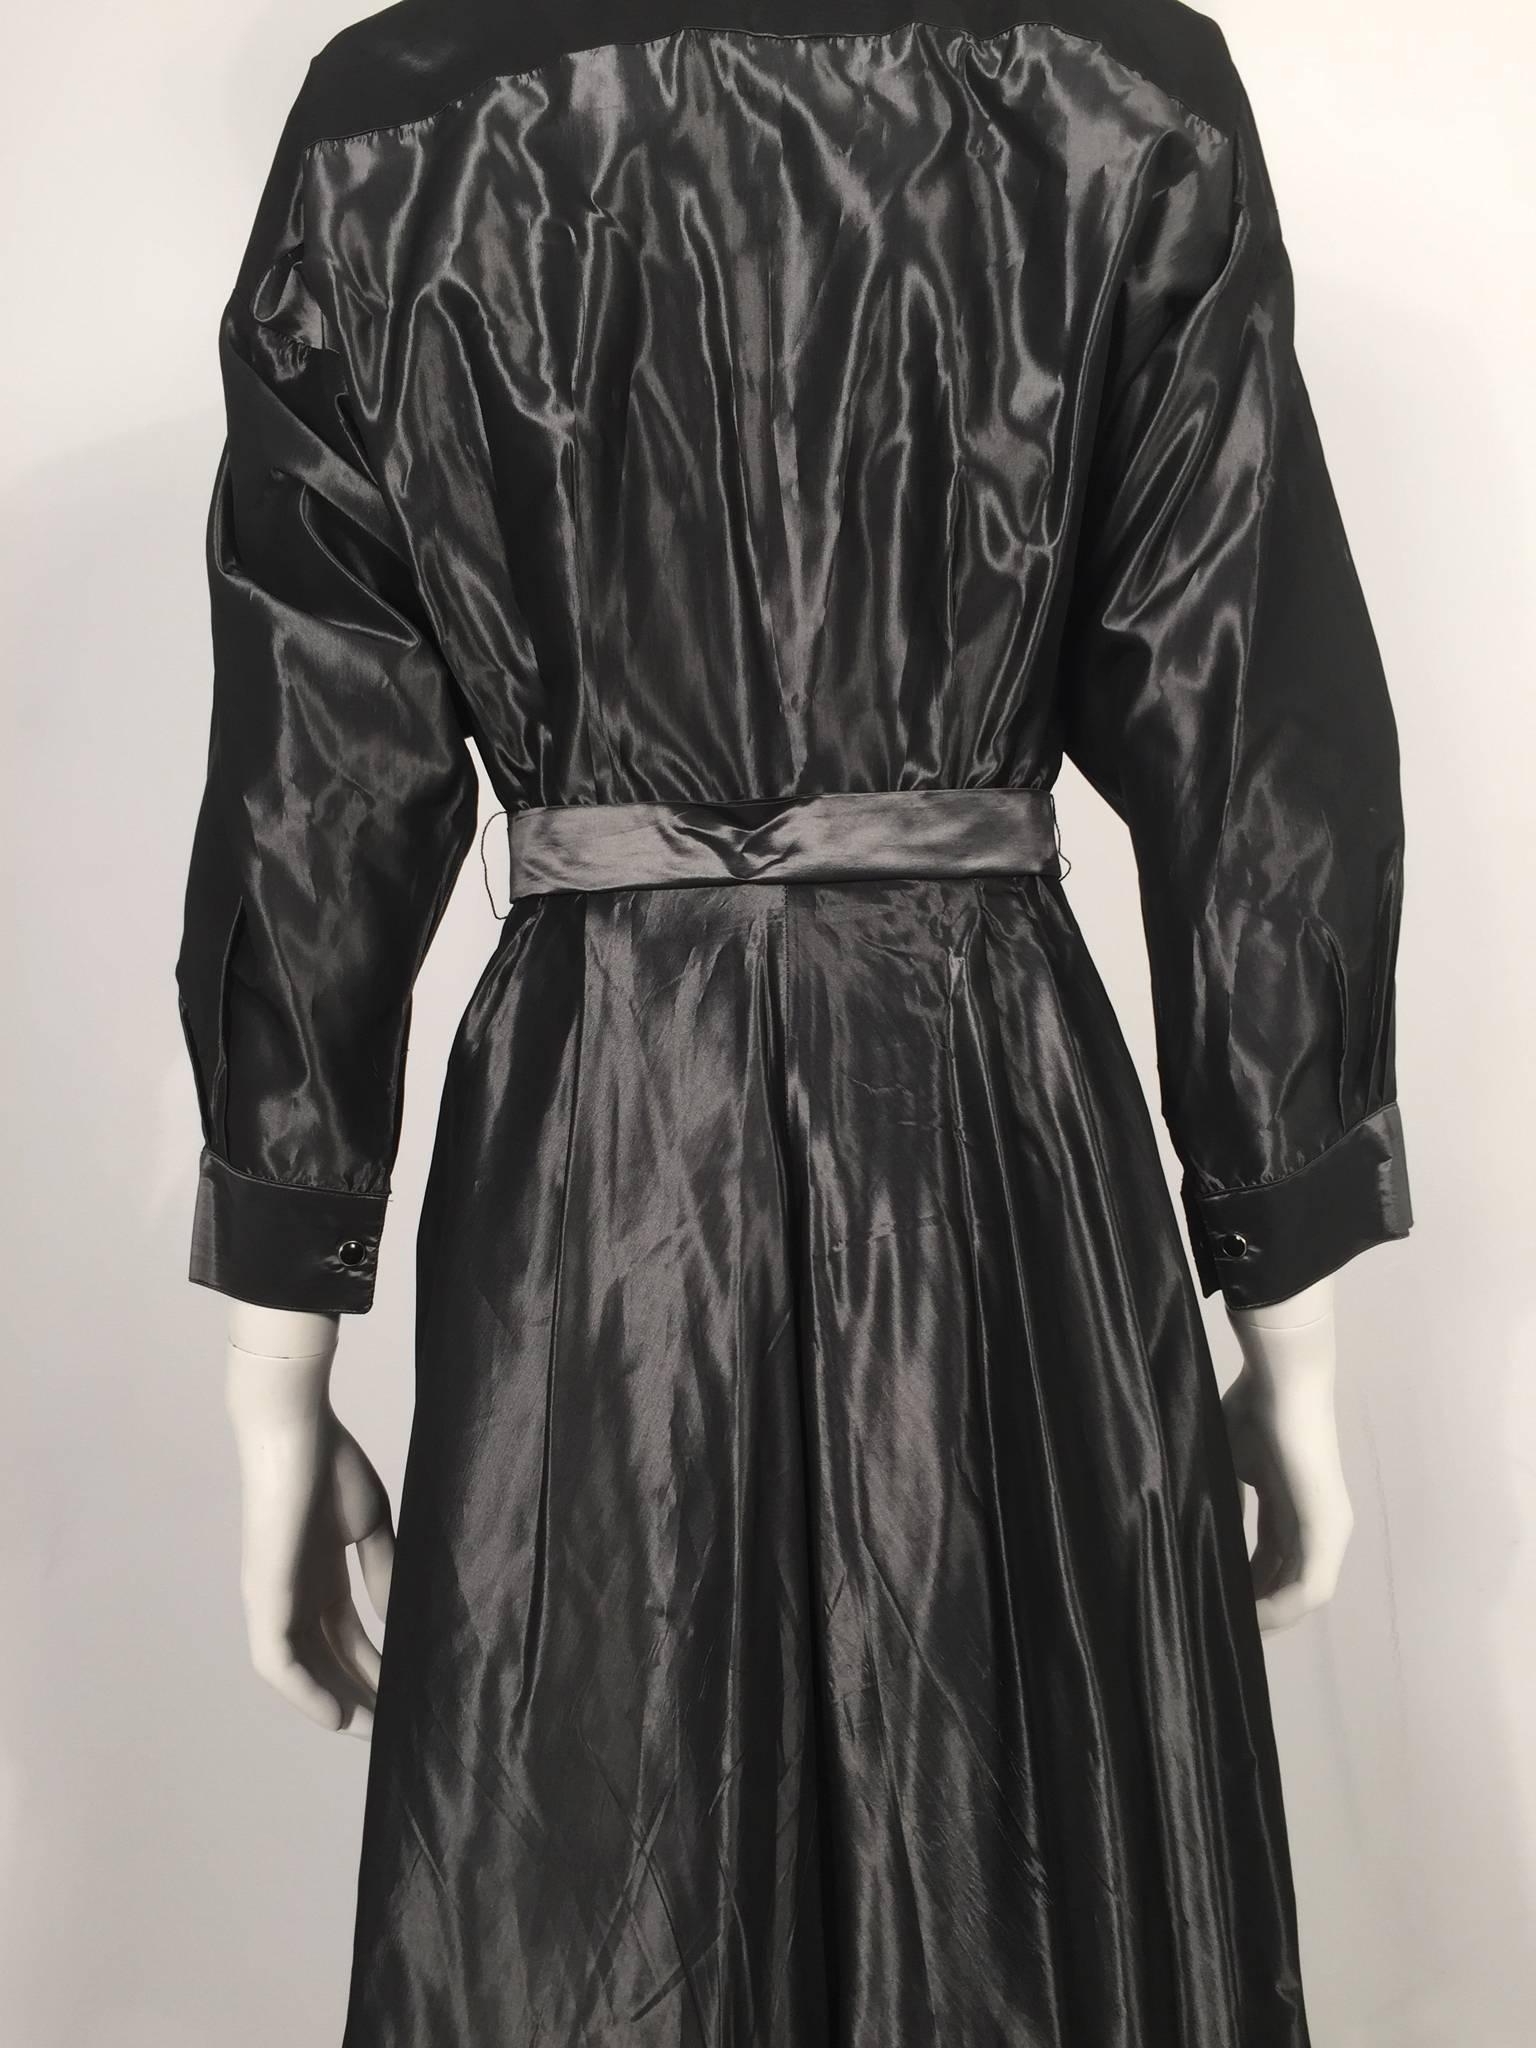 Norma Kamali Metallic Trench Coat  In Excellent Condition For Sale In New York, NY